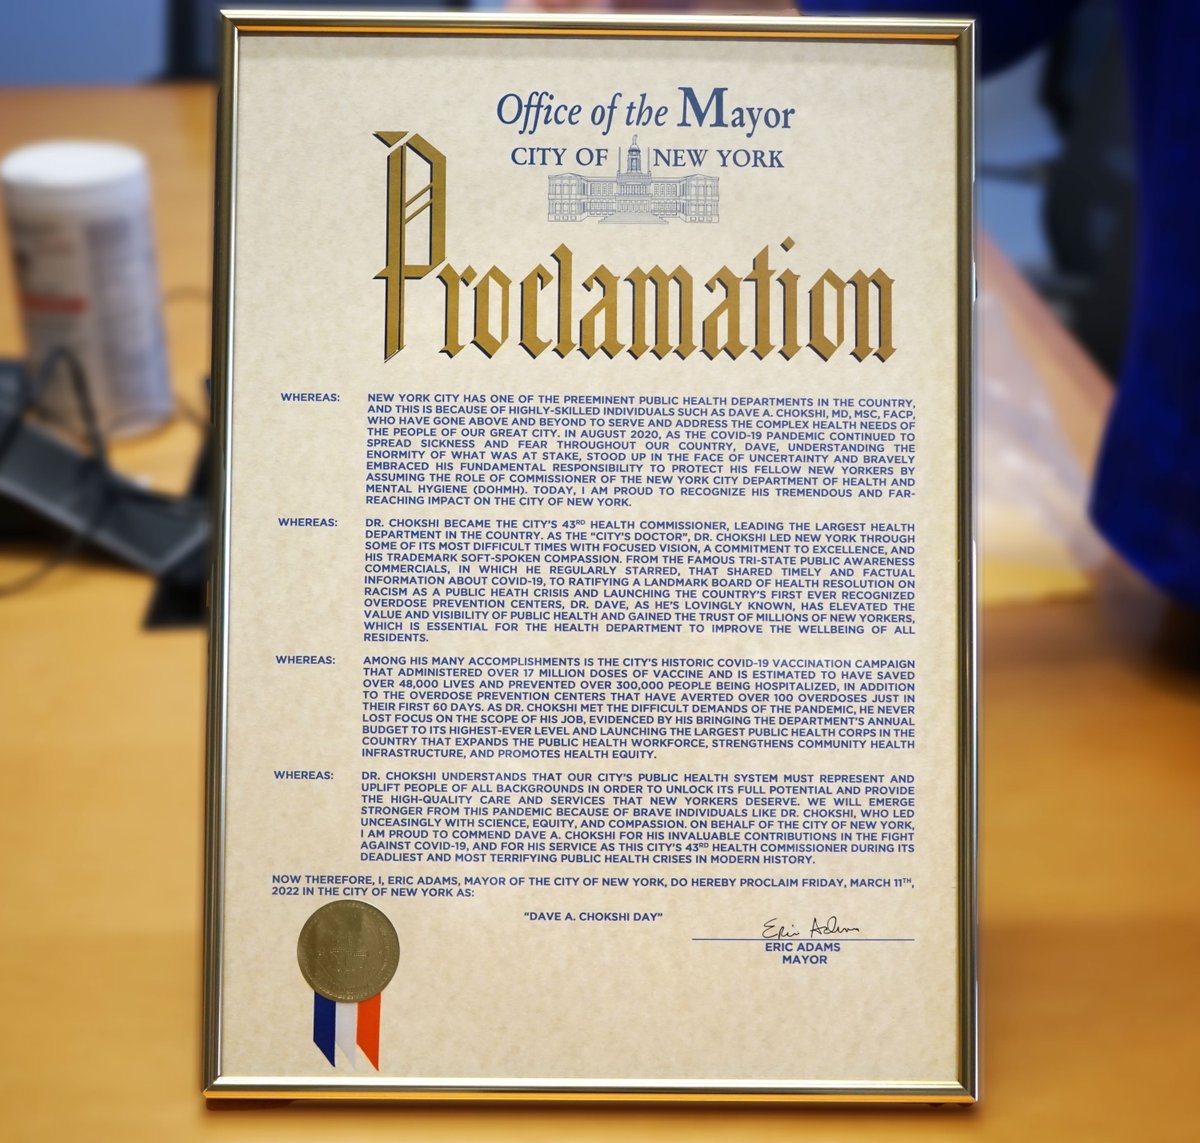 🎉March 11 is officially “Dr. Dave Chokshi Day” in NYC!🎉 Today @NYCMayor issued a proclamation honoring @NYCHealthCommr for his leadership during the pandemic and his dedication to protecting and improving the health of all New Yorkers. Congratulations, Dr. Chokshi! 👏👏👏